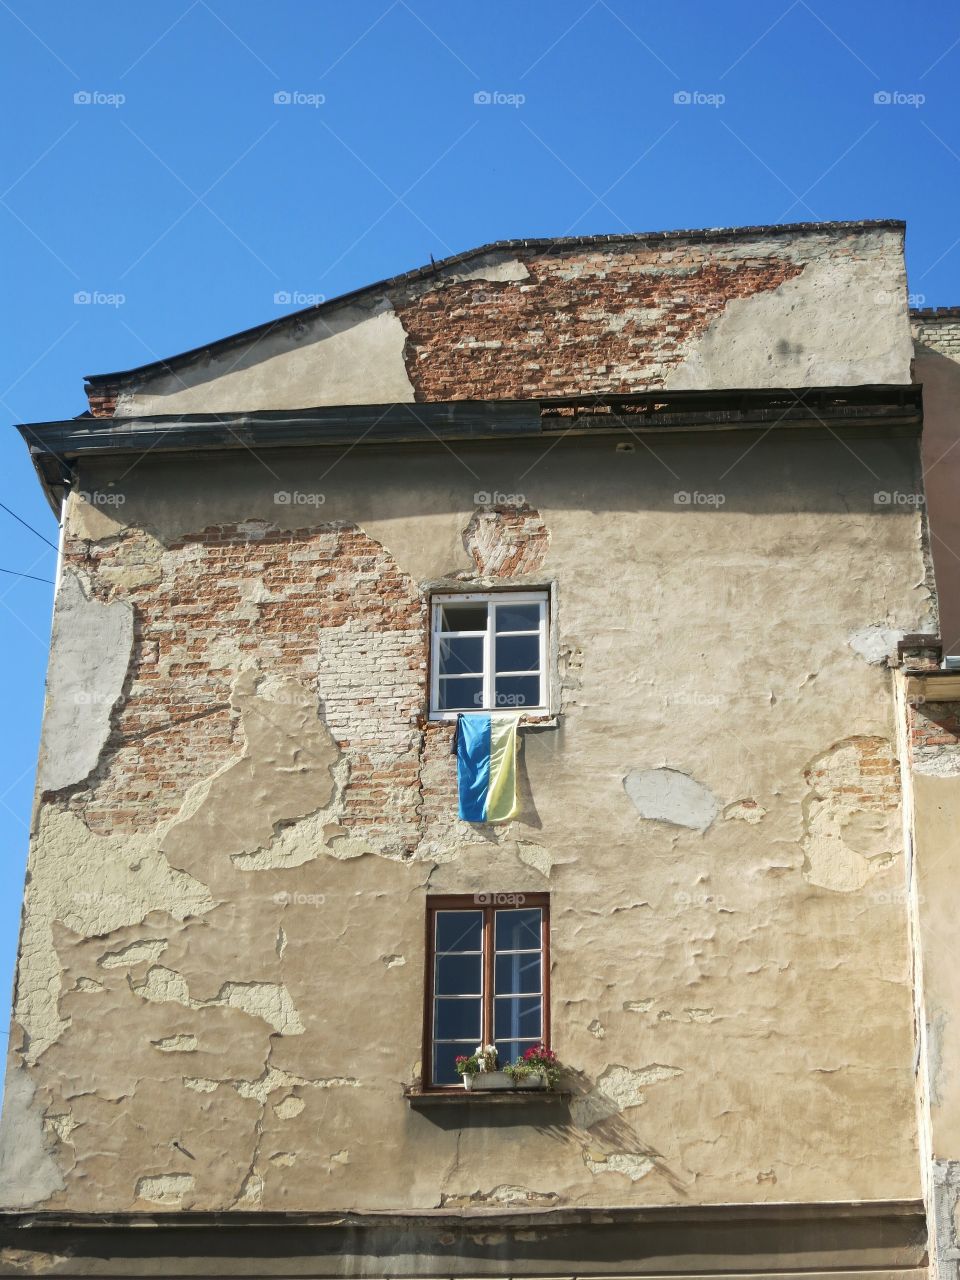 Flag by the window on old building